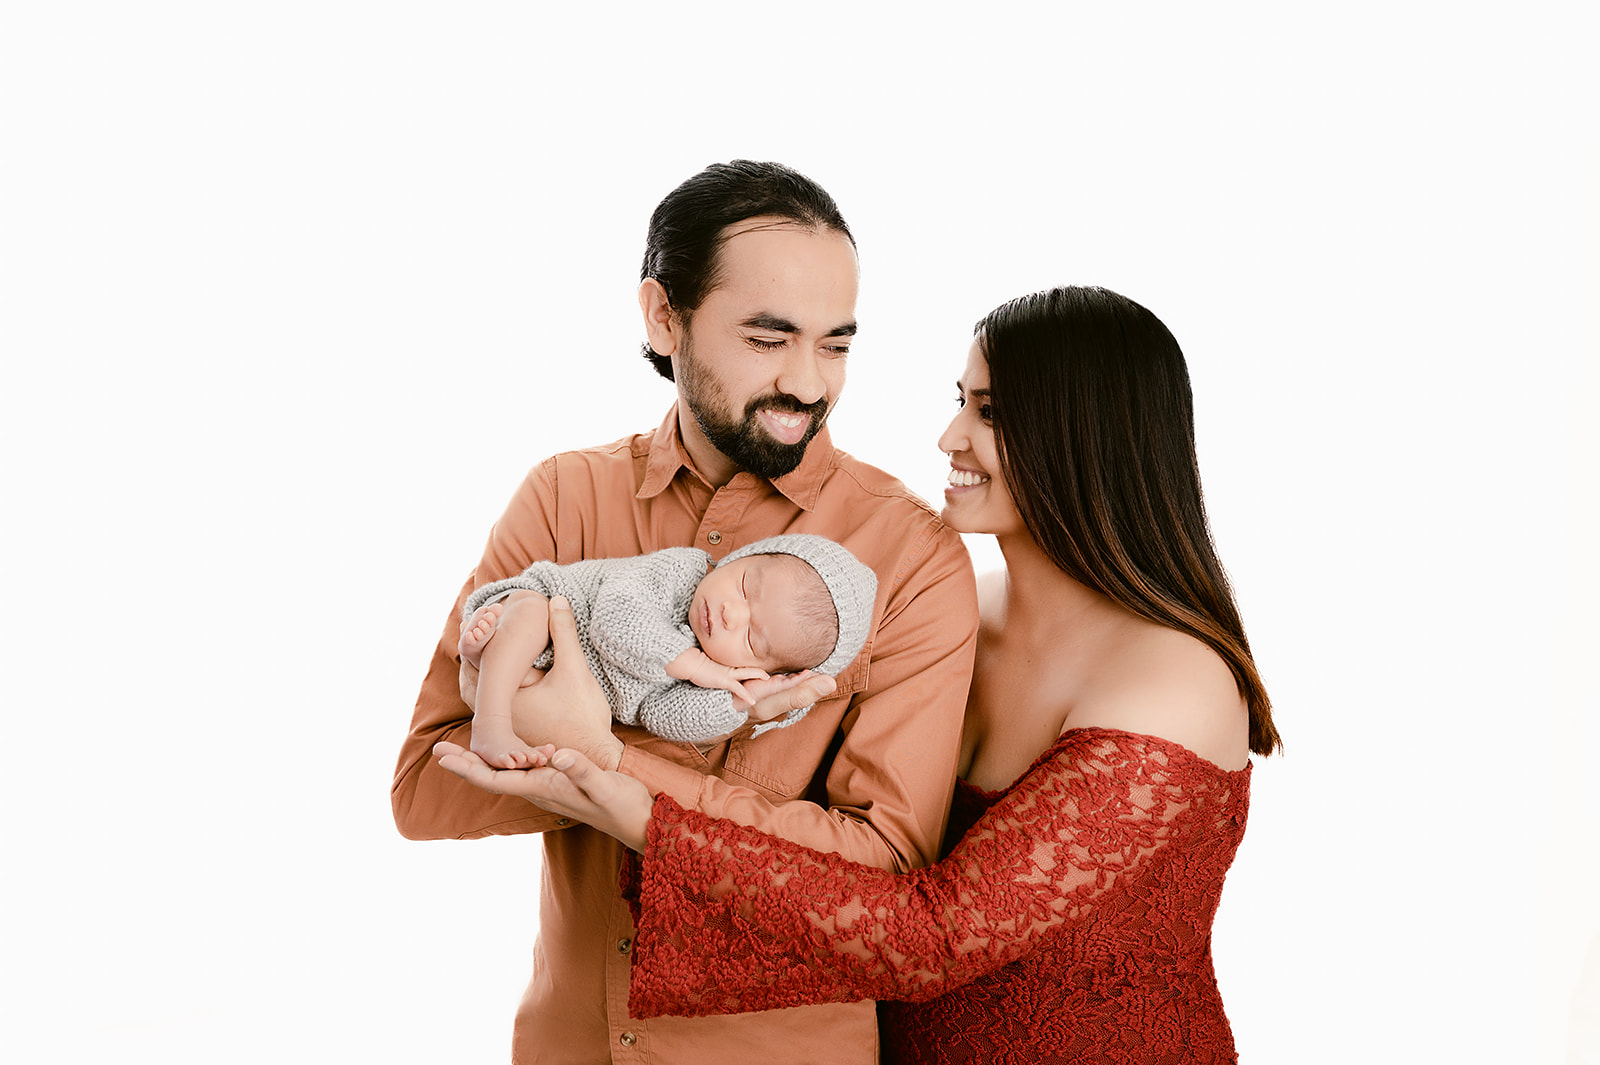 Family Portrait | Princeton MN Newborn Photography Studio | Safety Certified Newborn Photographer with 10 years experien